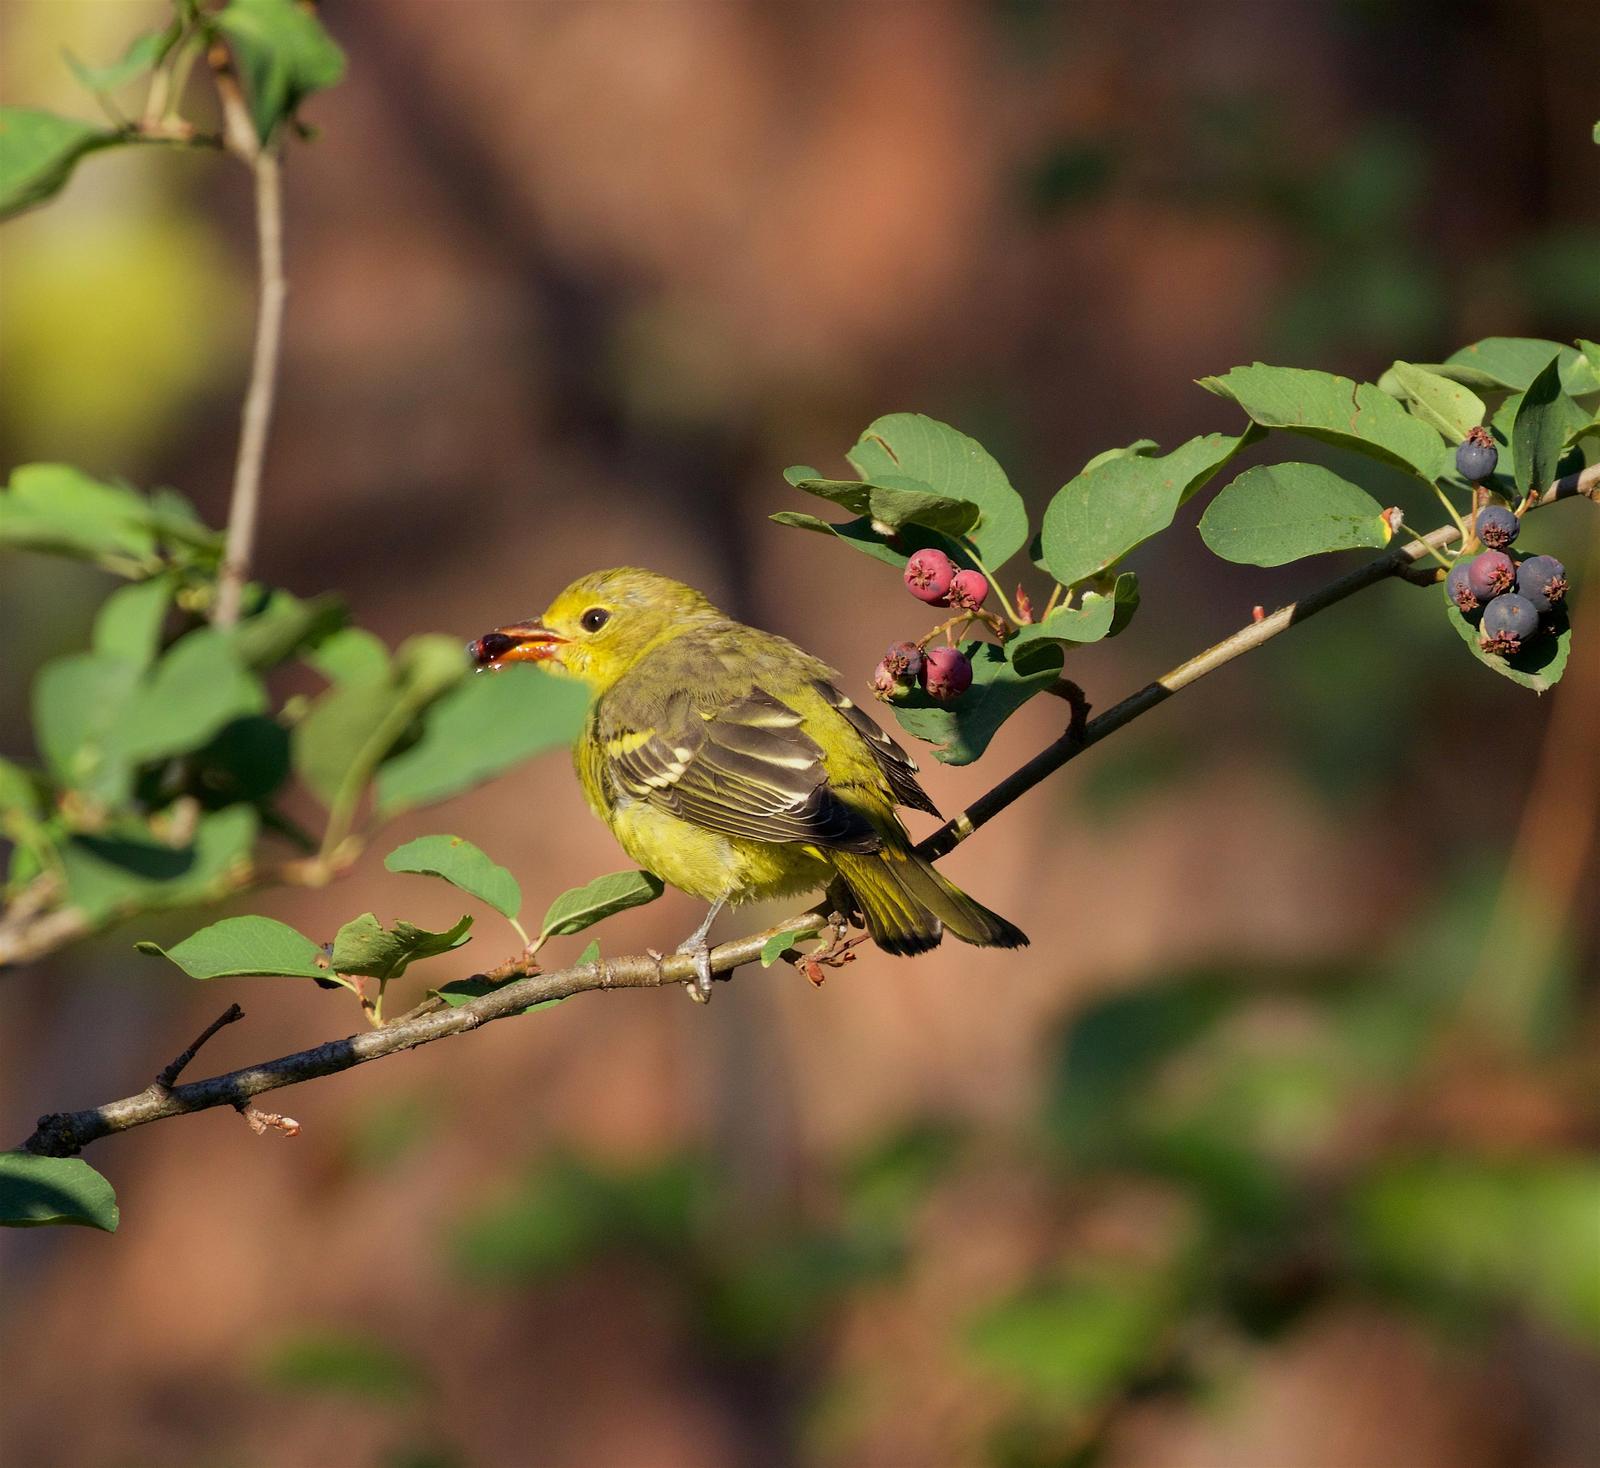 Western Tanager Photo by Kathryn Keith